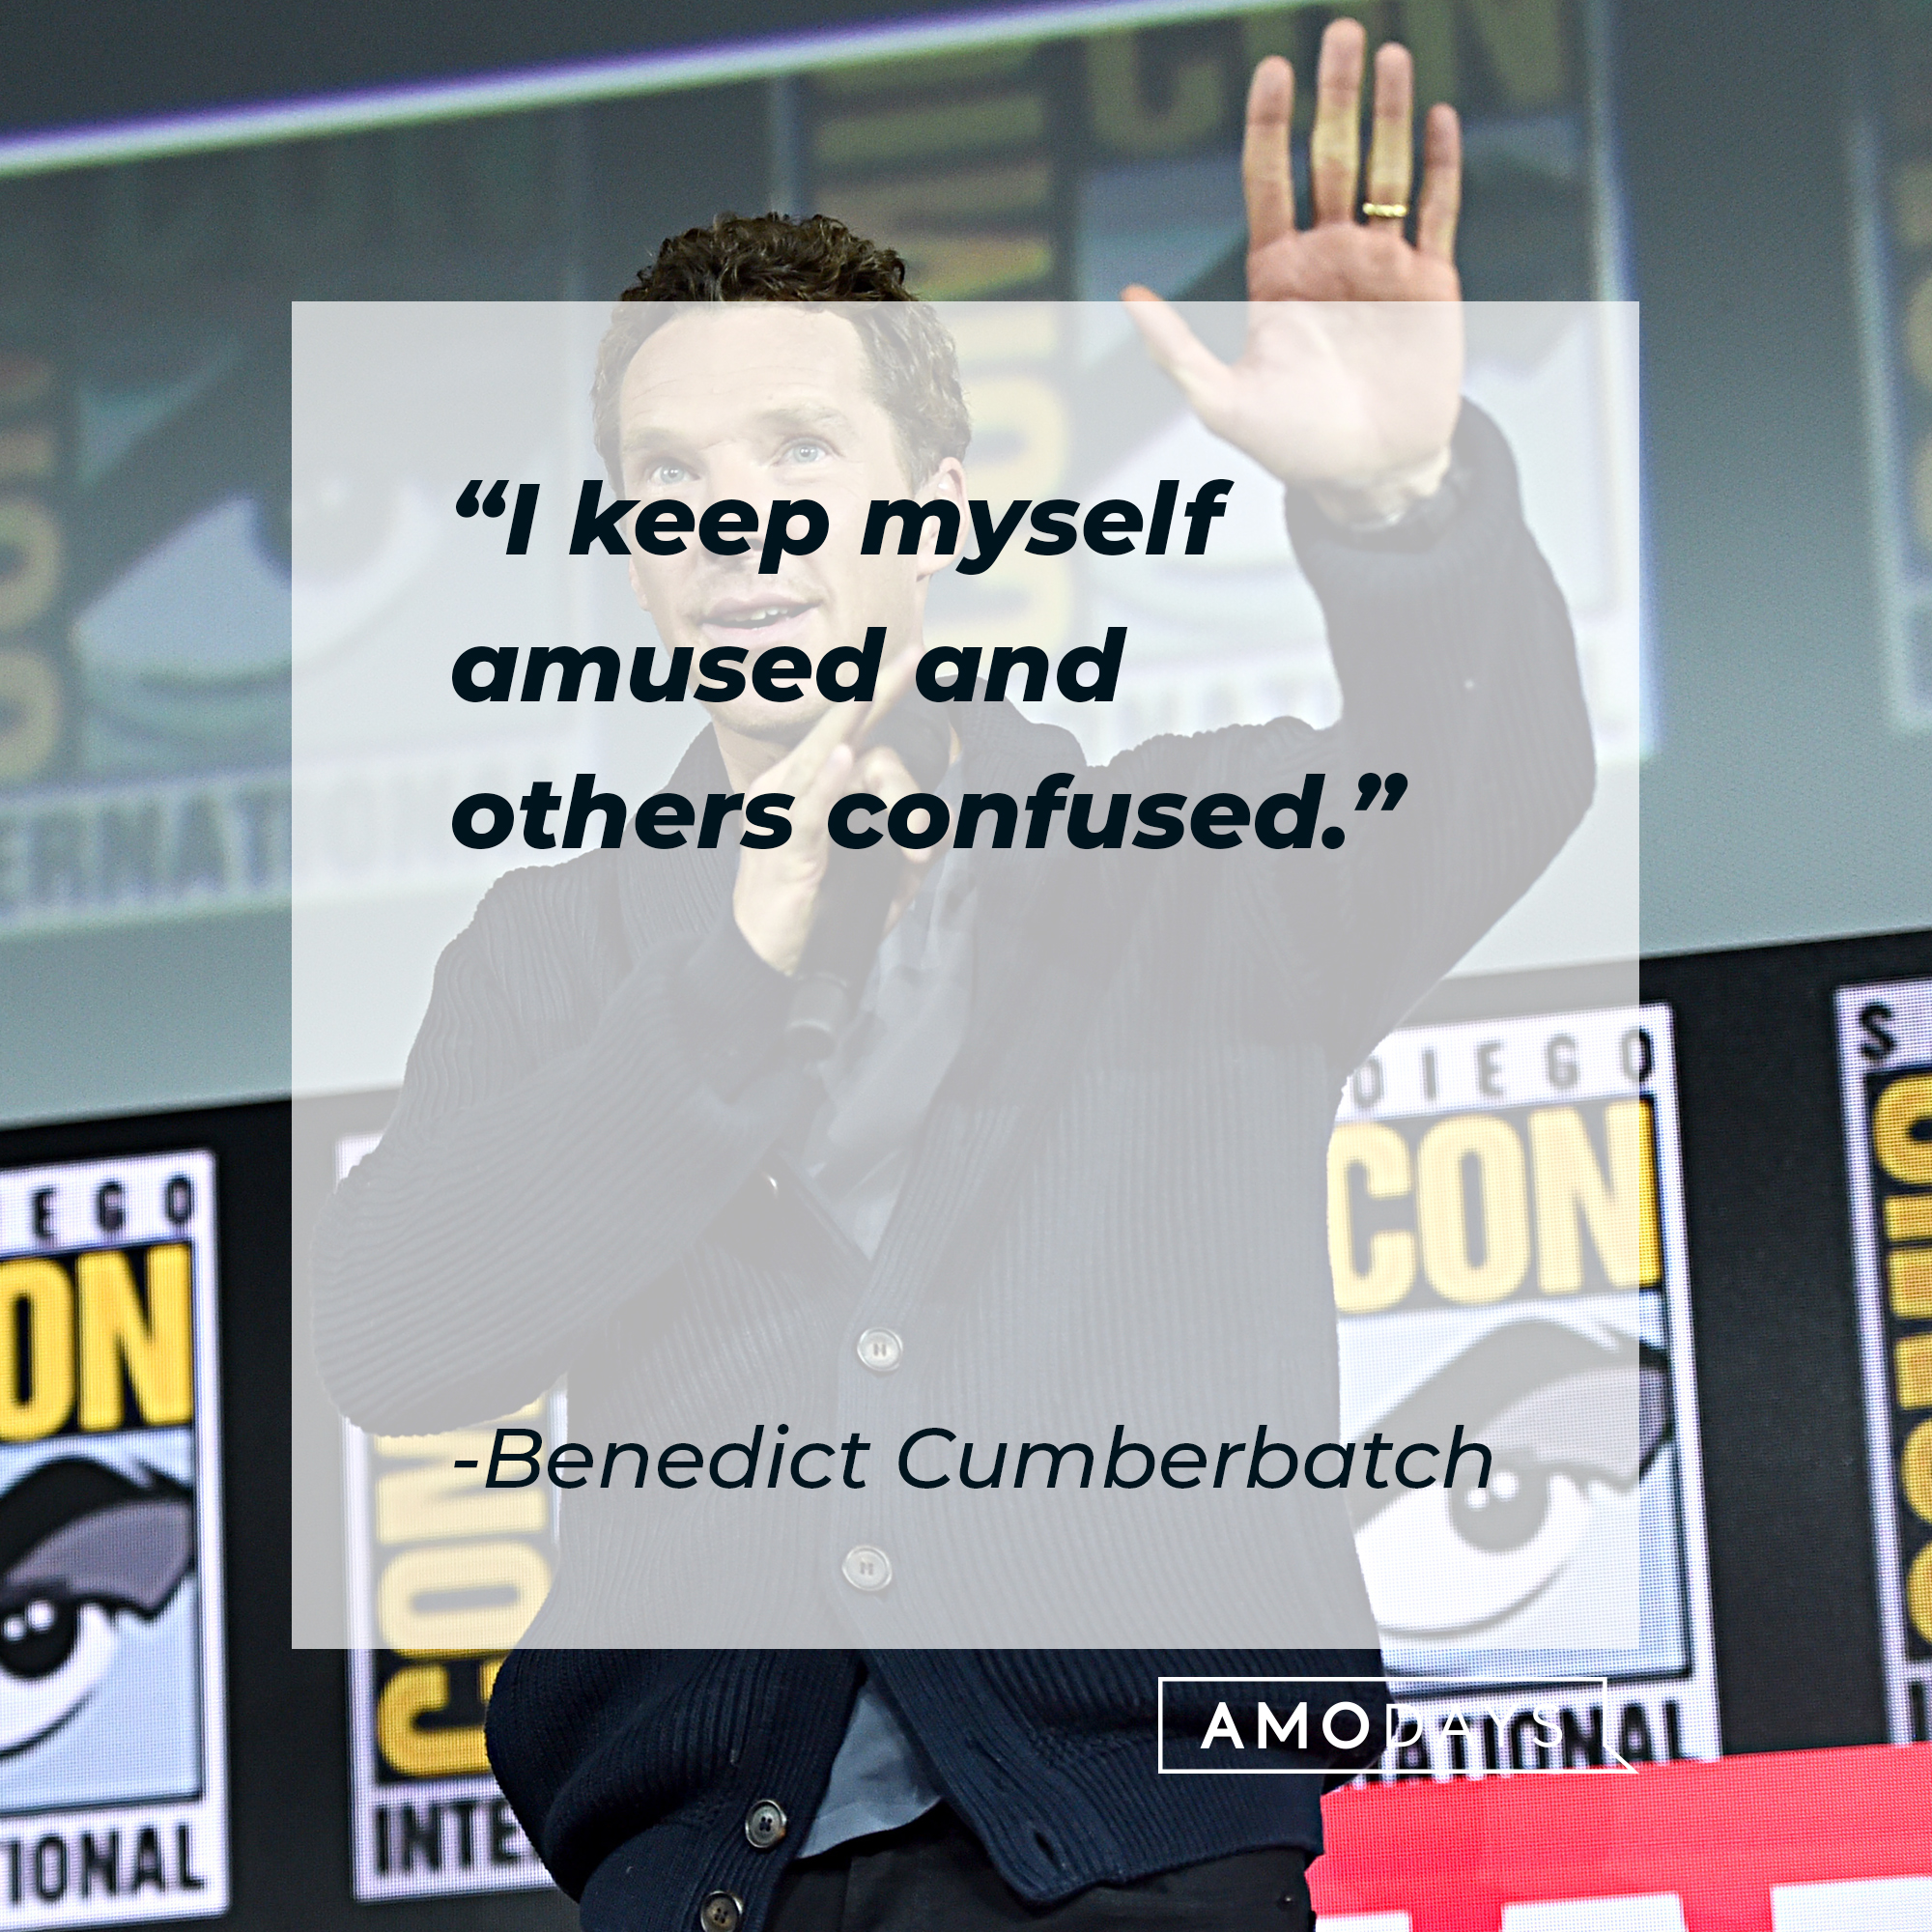 Benedict Cumberbatch, with his quote:: “I keep myself amused and others confused.” | Source: Getty Images